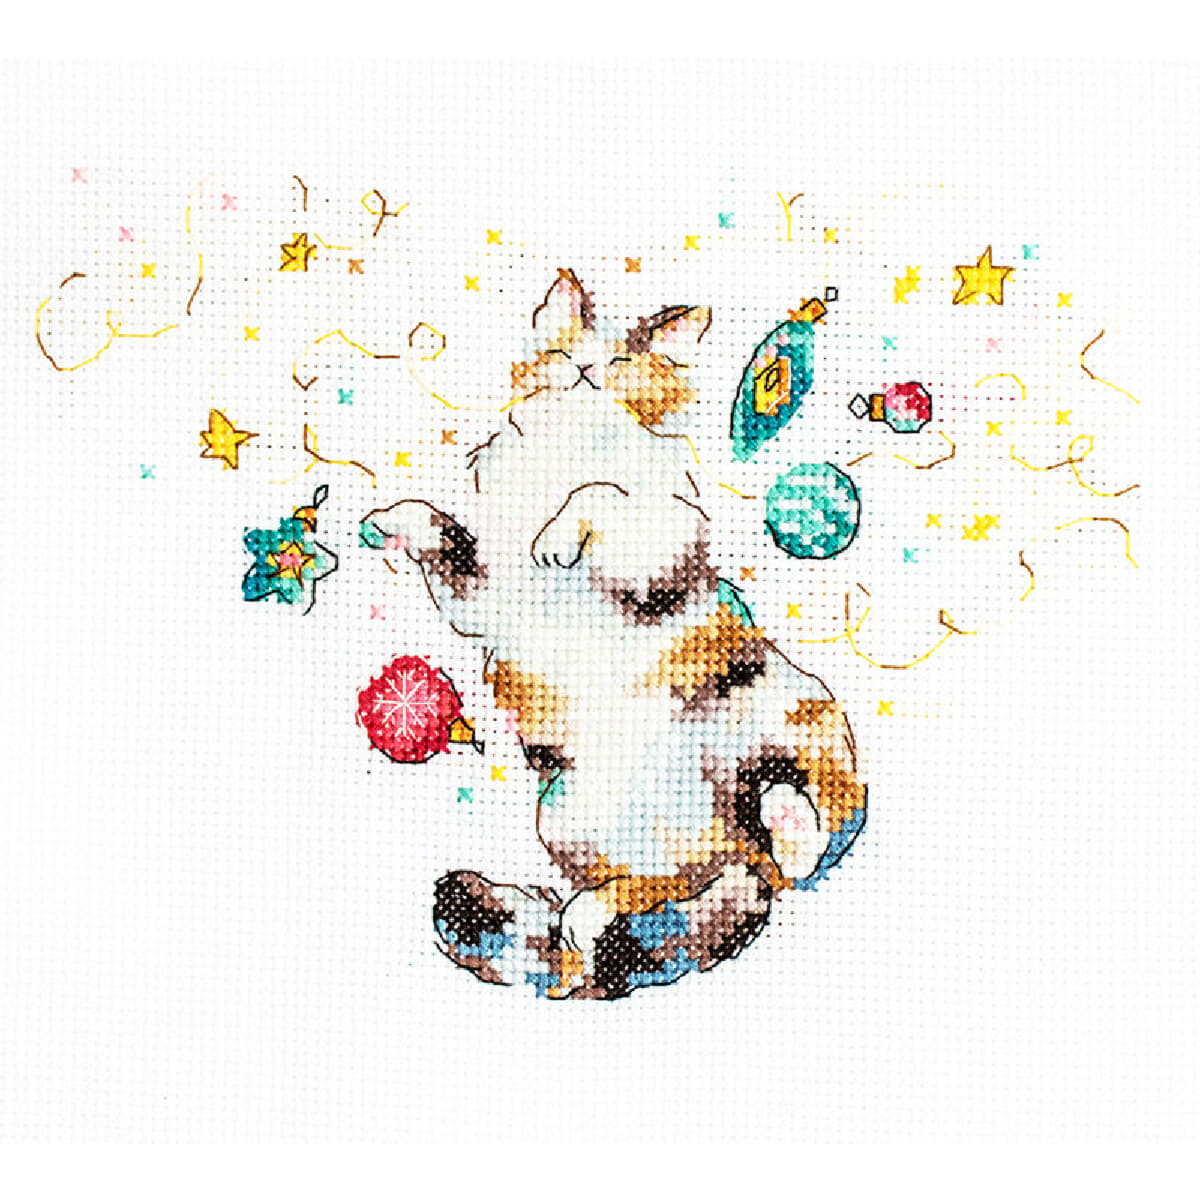 Letistitch counted cross stitch kit "Cats...